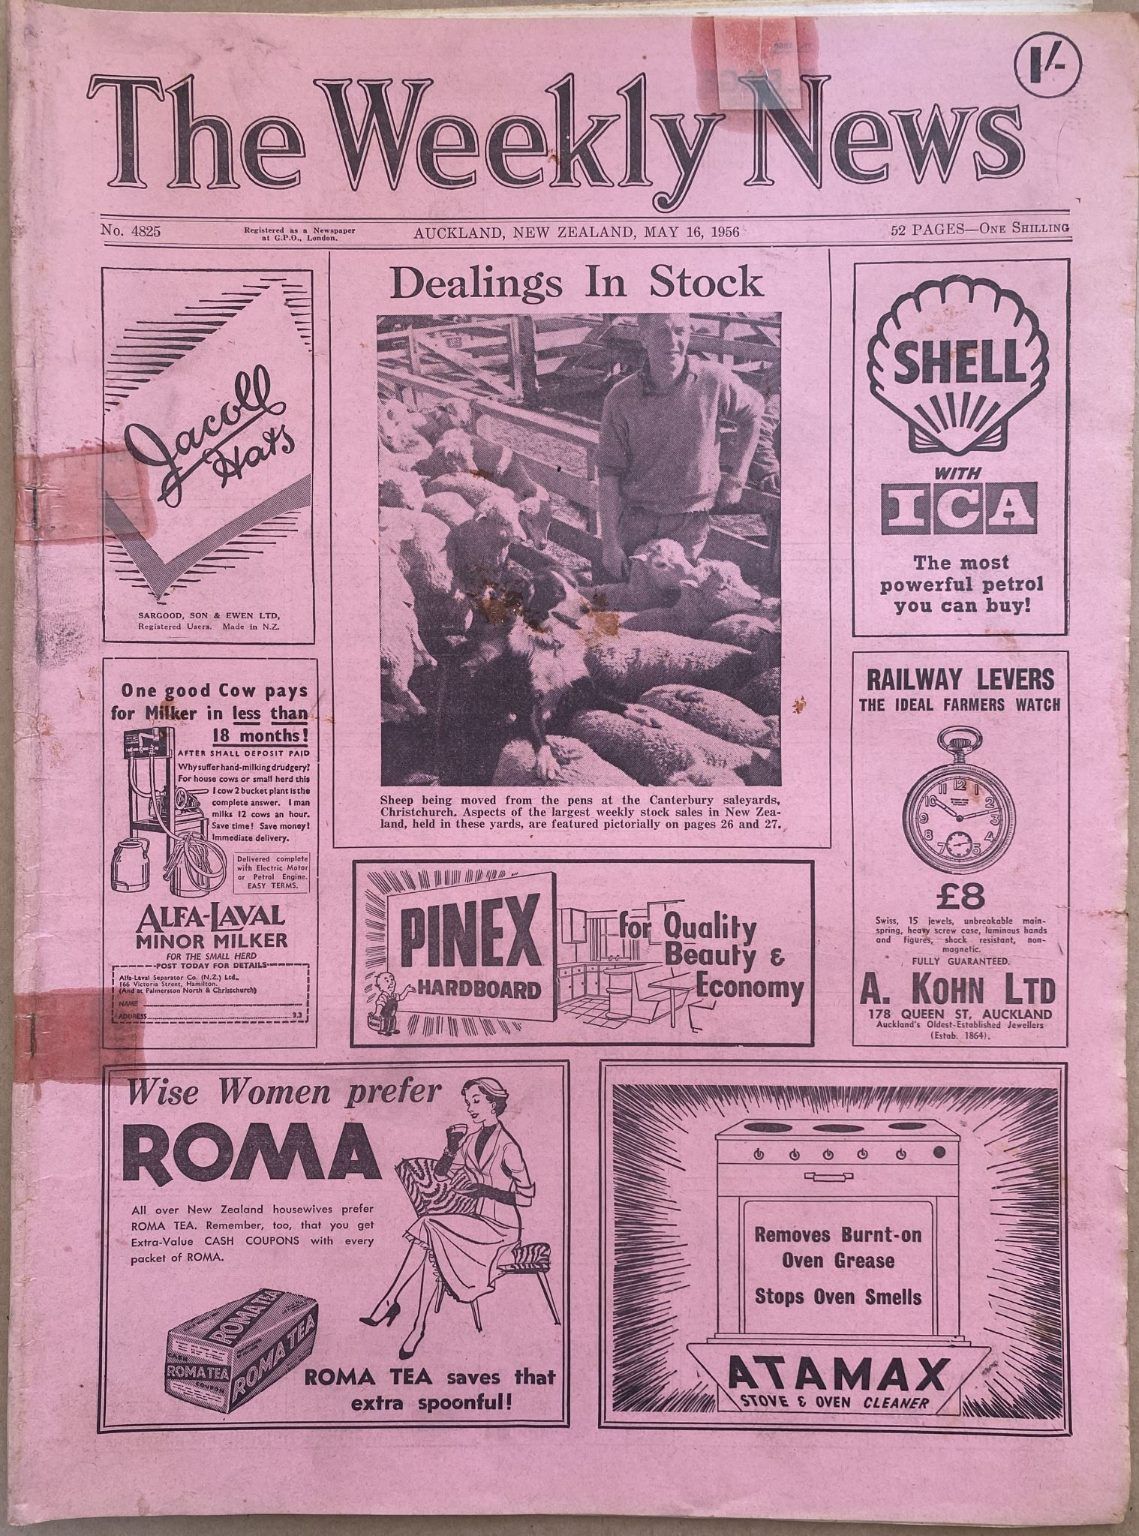 OLD NEWSPAPER: The Weekly News - No. 4825, 16 May 1956